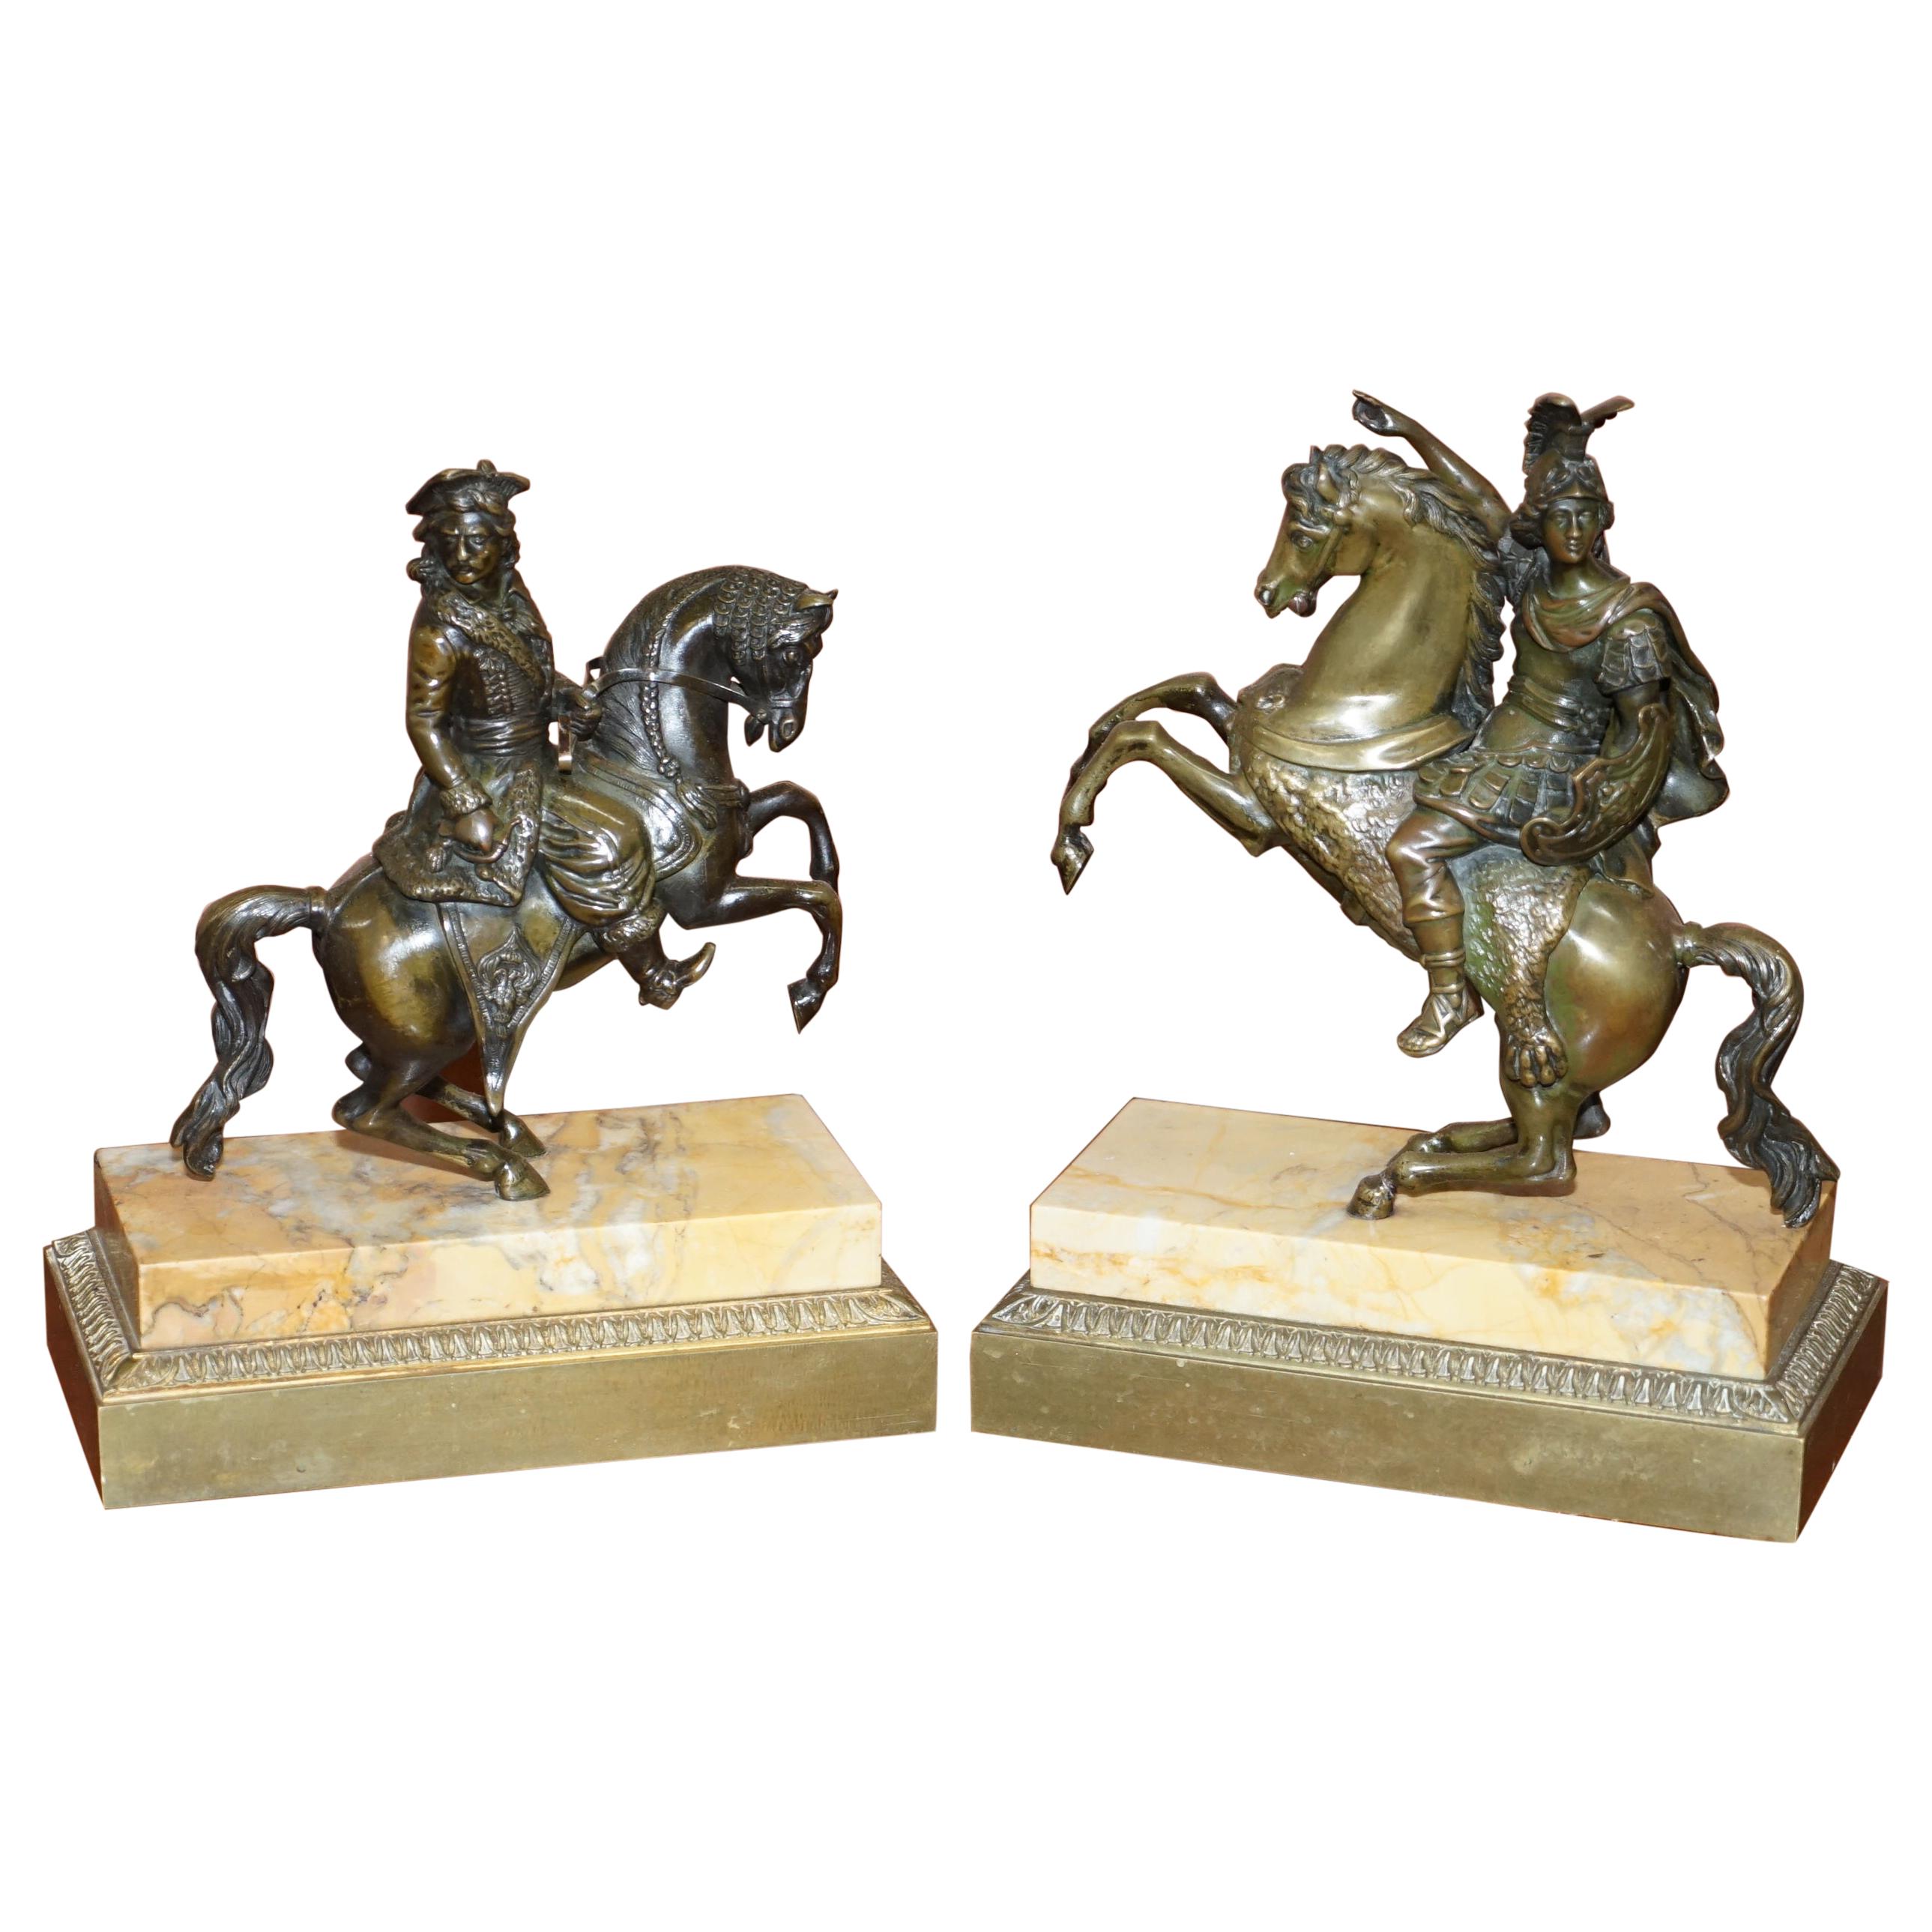 Pair of 19th Century Equestrian Bronzes Russian Cossack & Roman Solider Horses For Sale